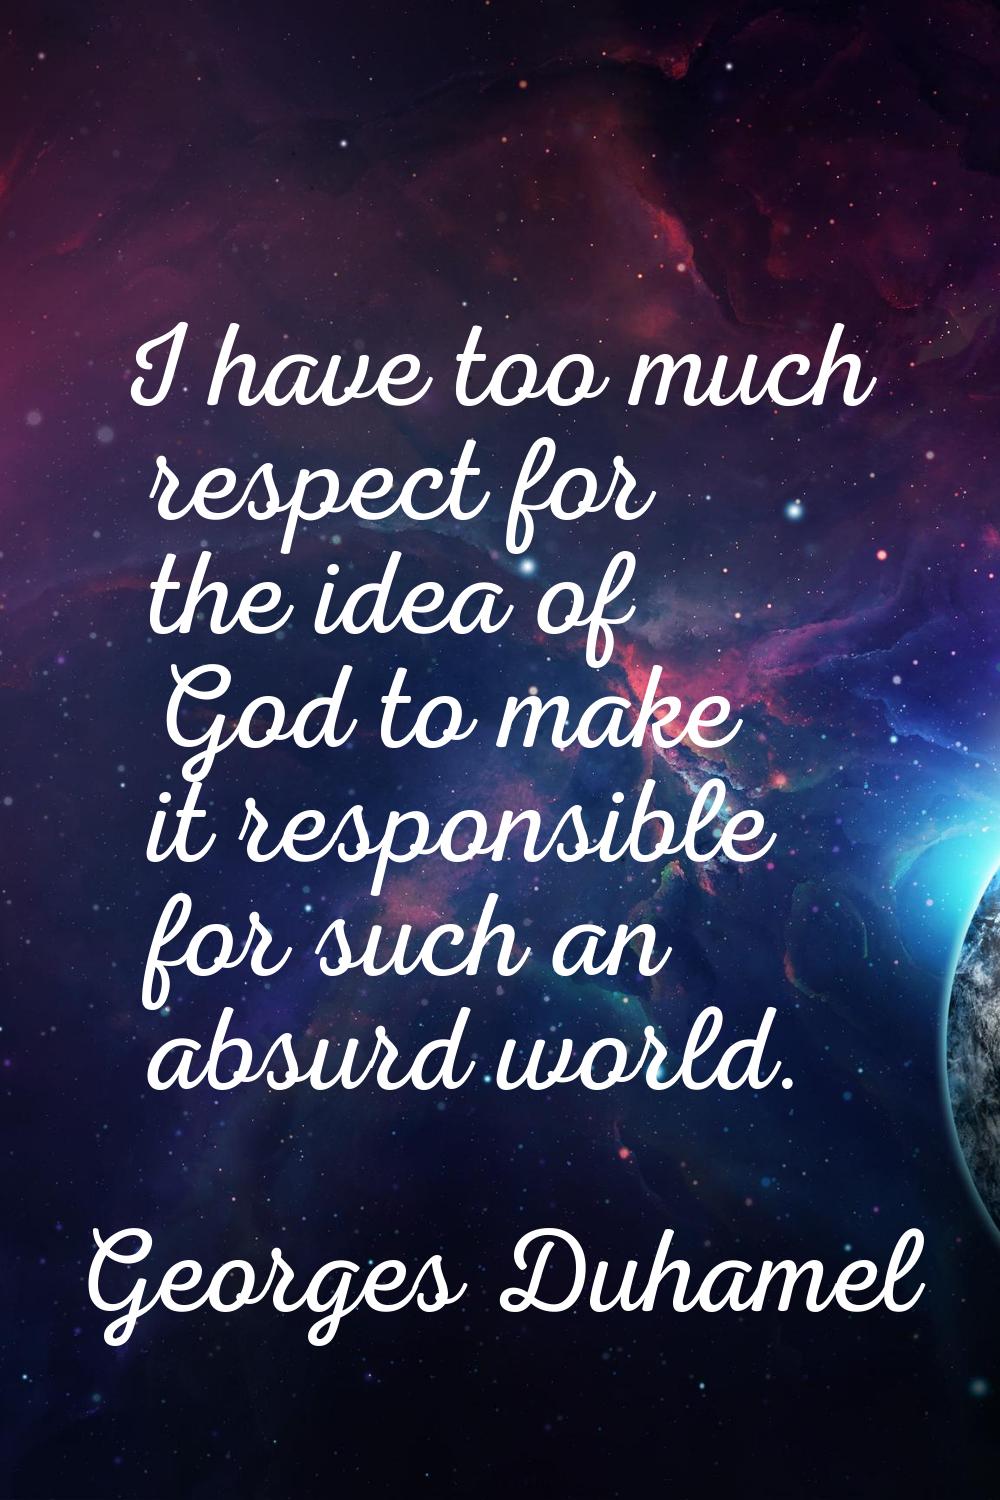 I have too much respect for the idea of God to make it responsible for such an absurd world.